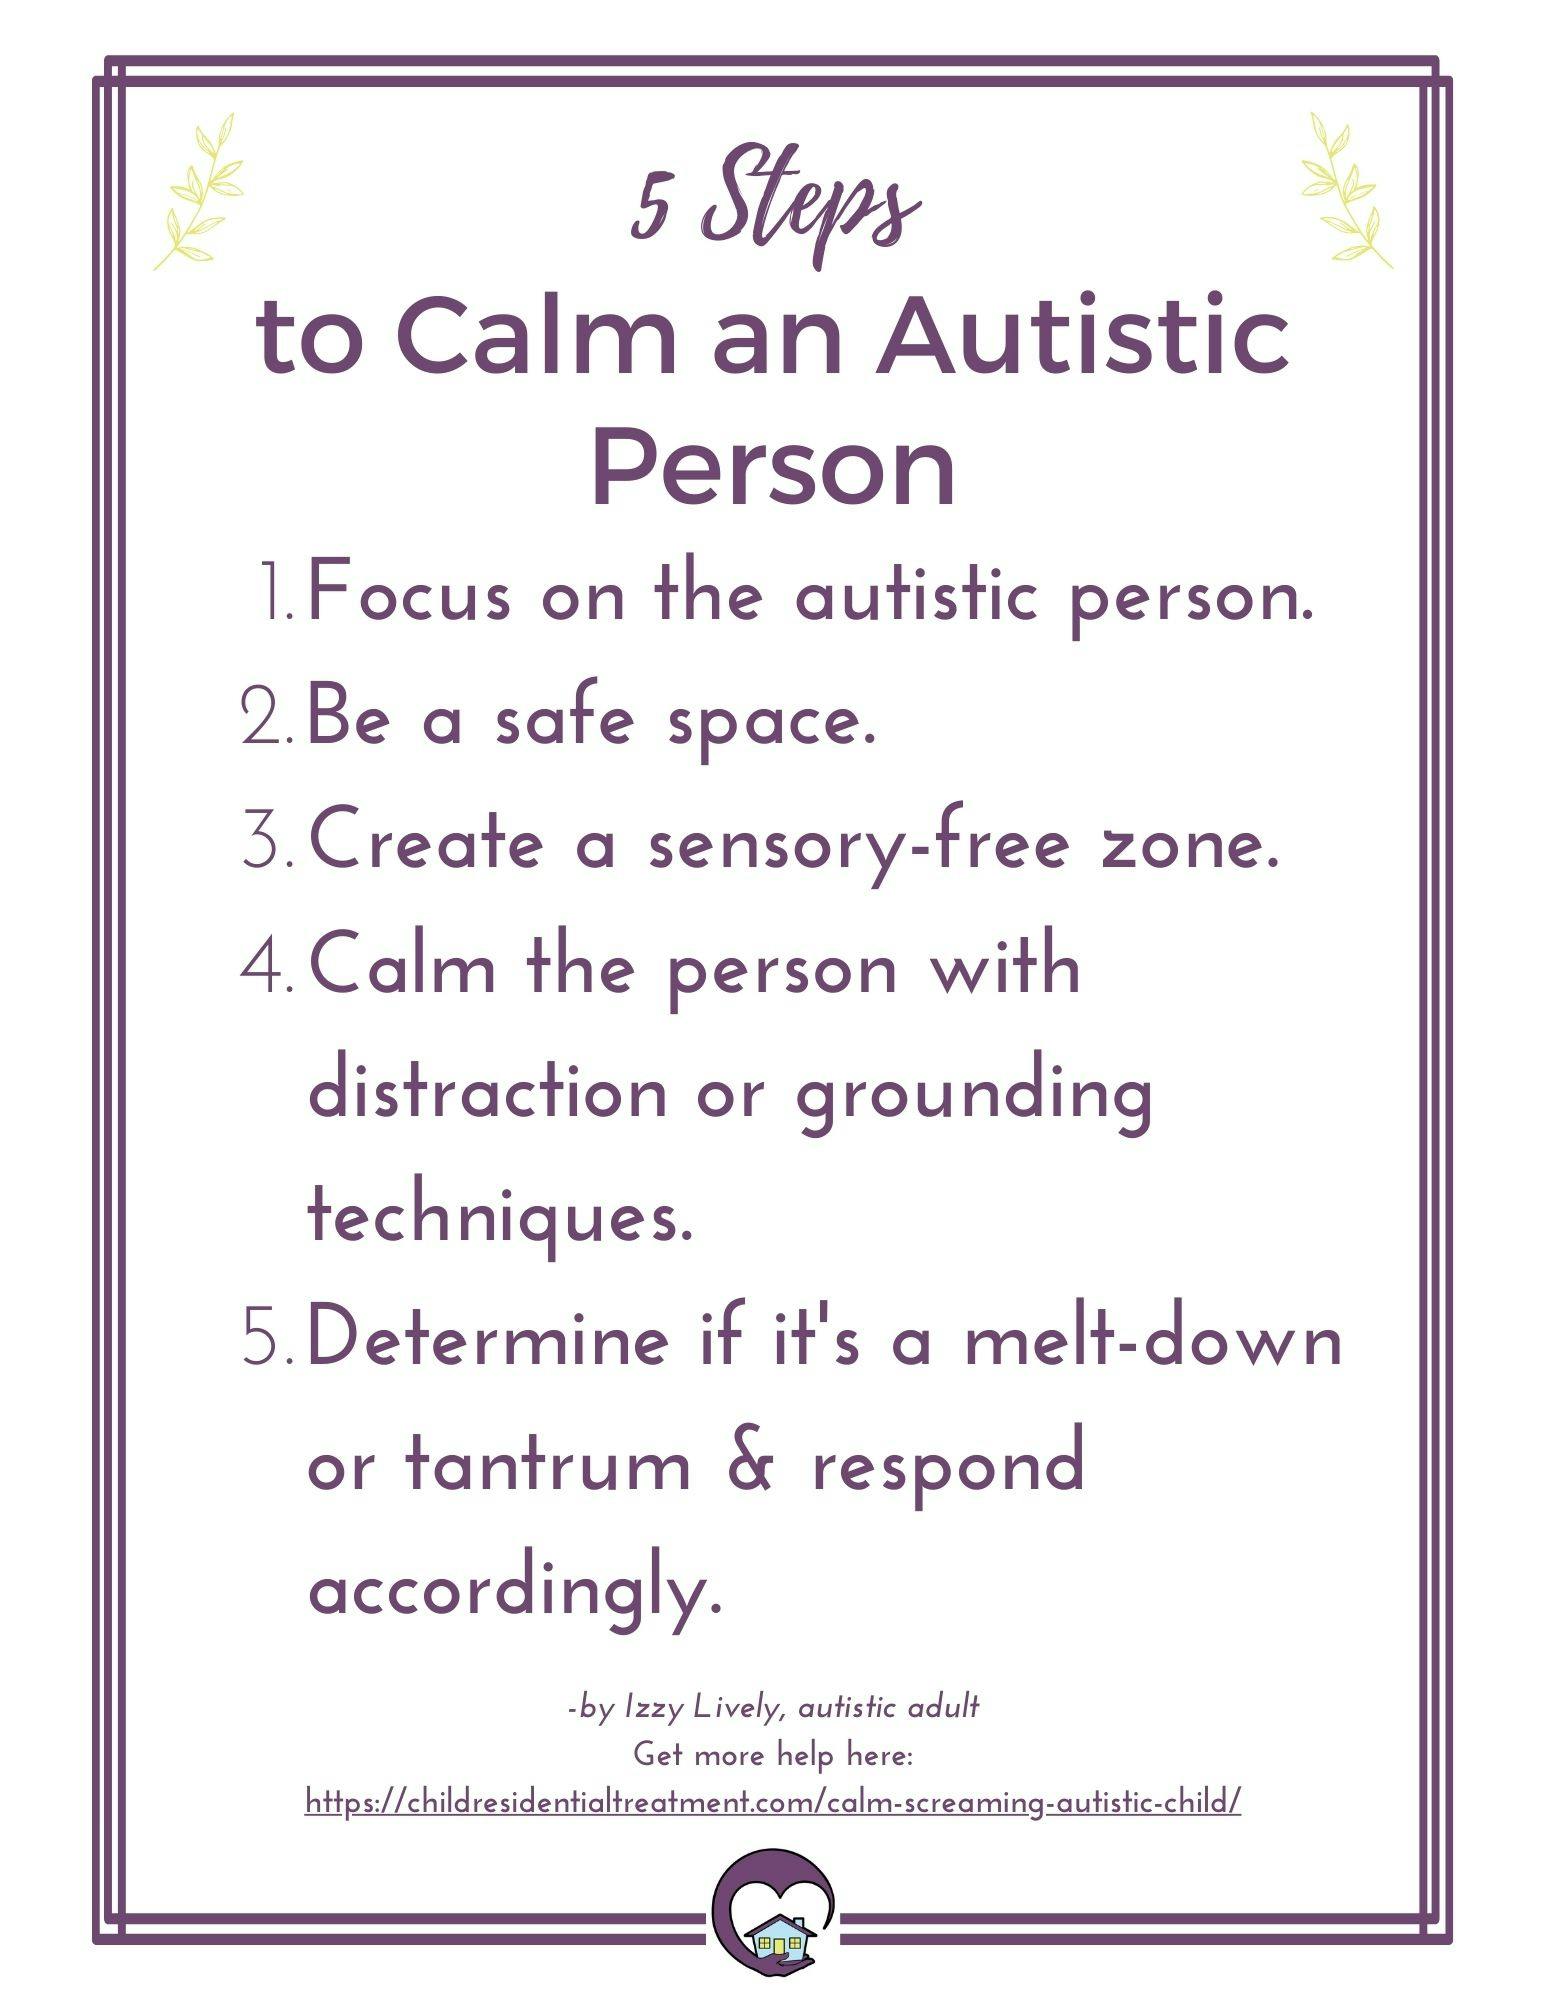 What not to do with autistic child?